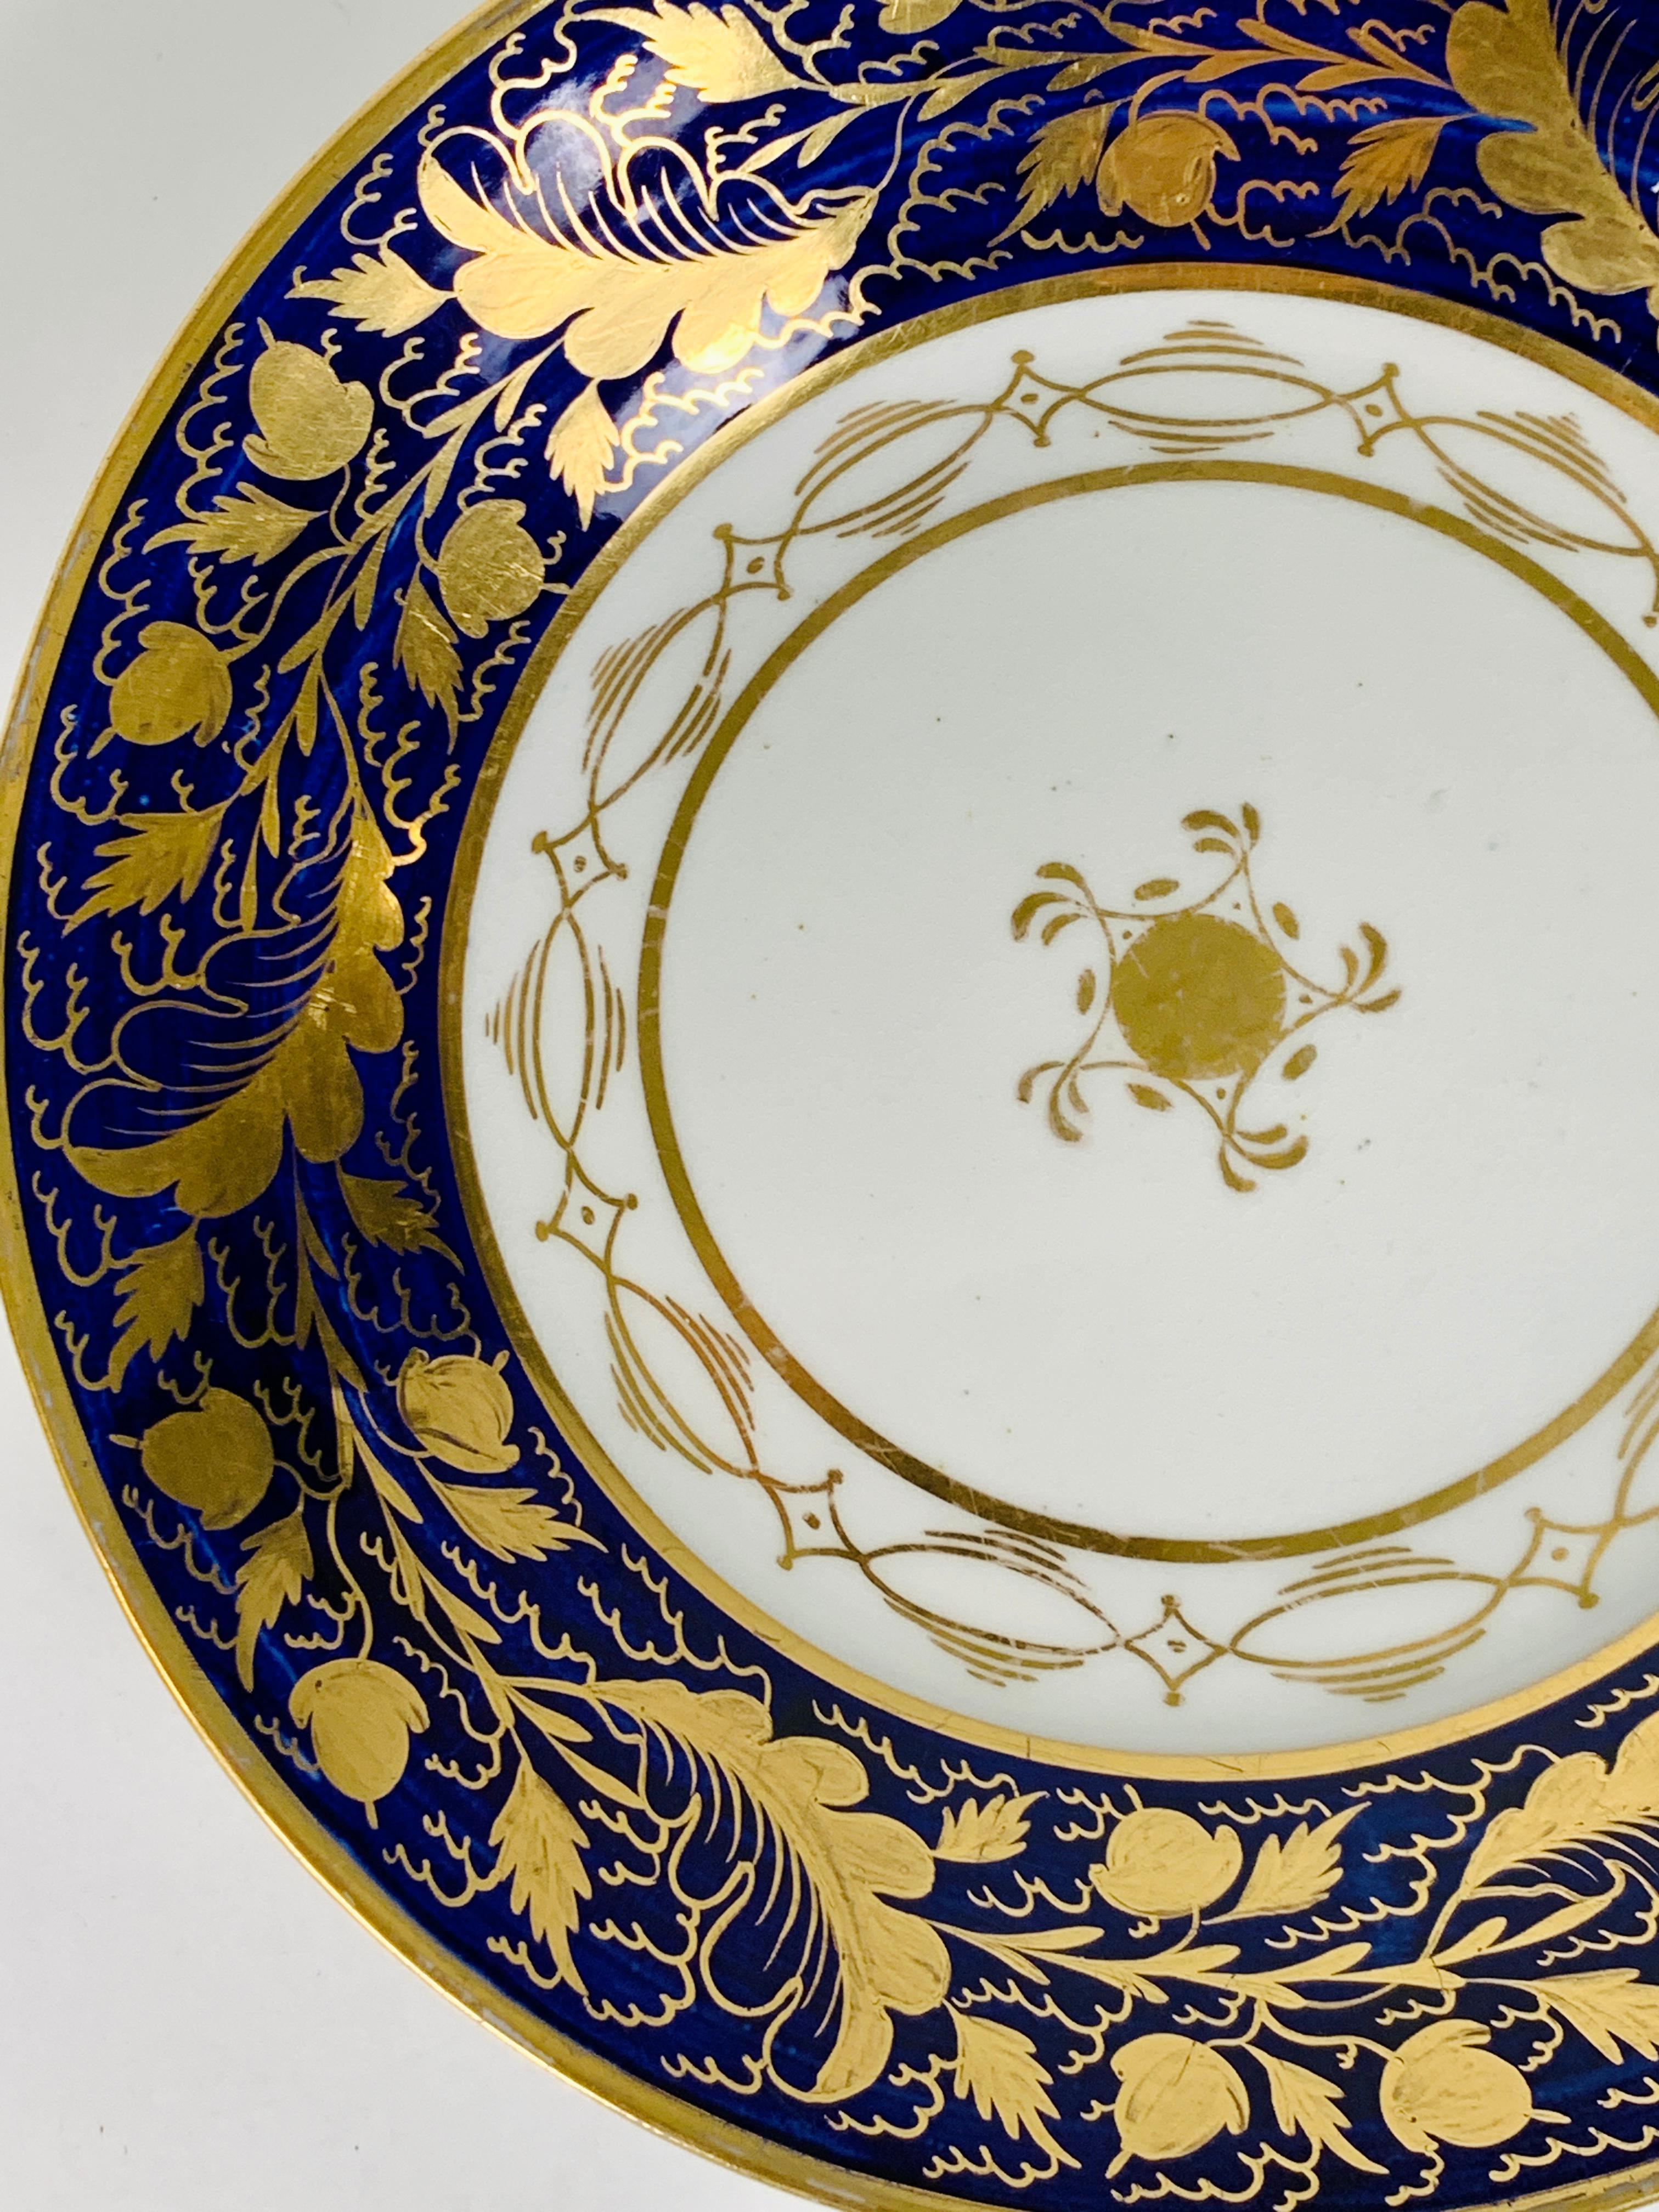 English Pair Hand-Painted Blue & Gold Antique Porcelain Dishes, Late 18th Century c-1790